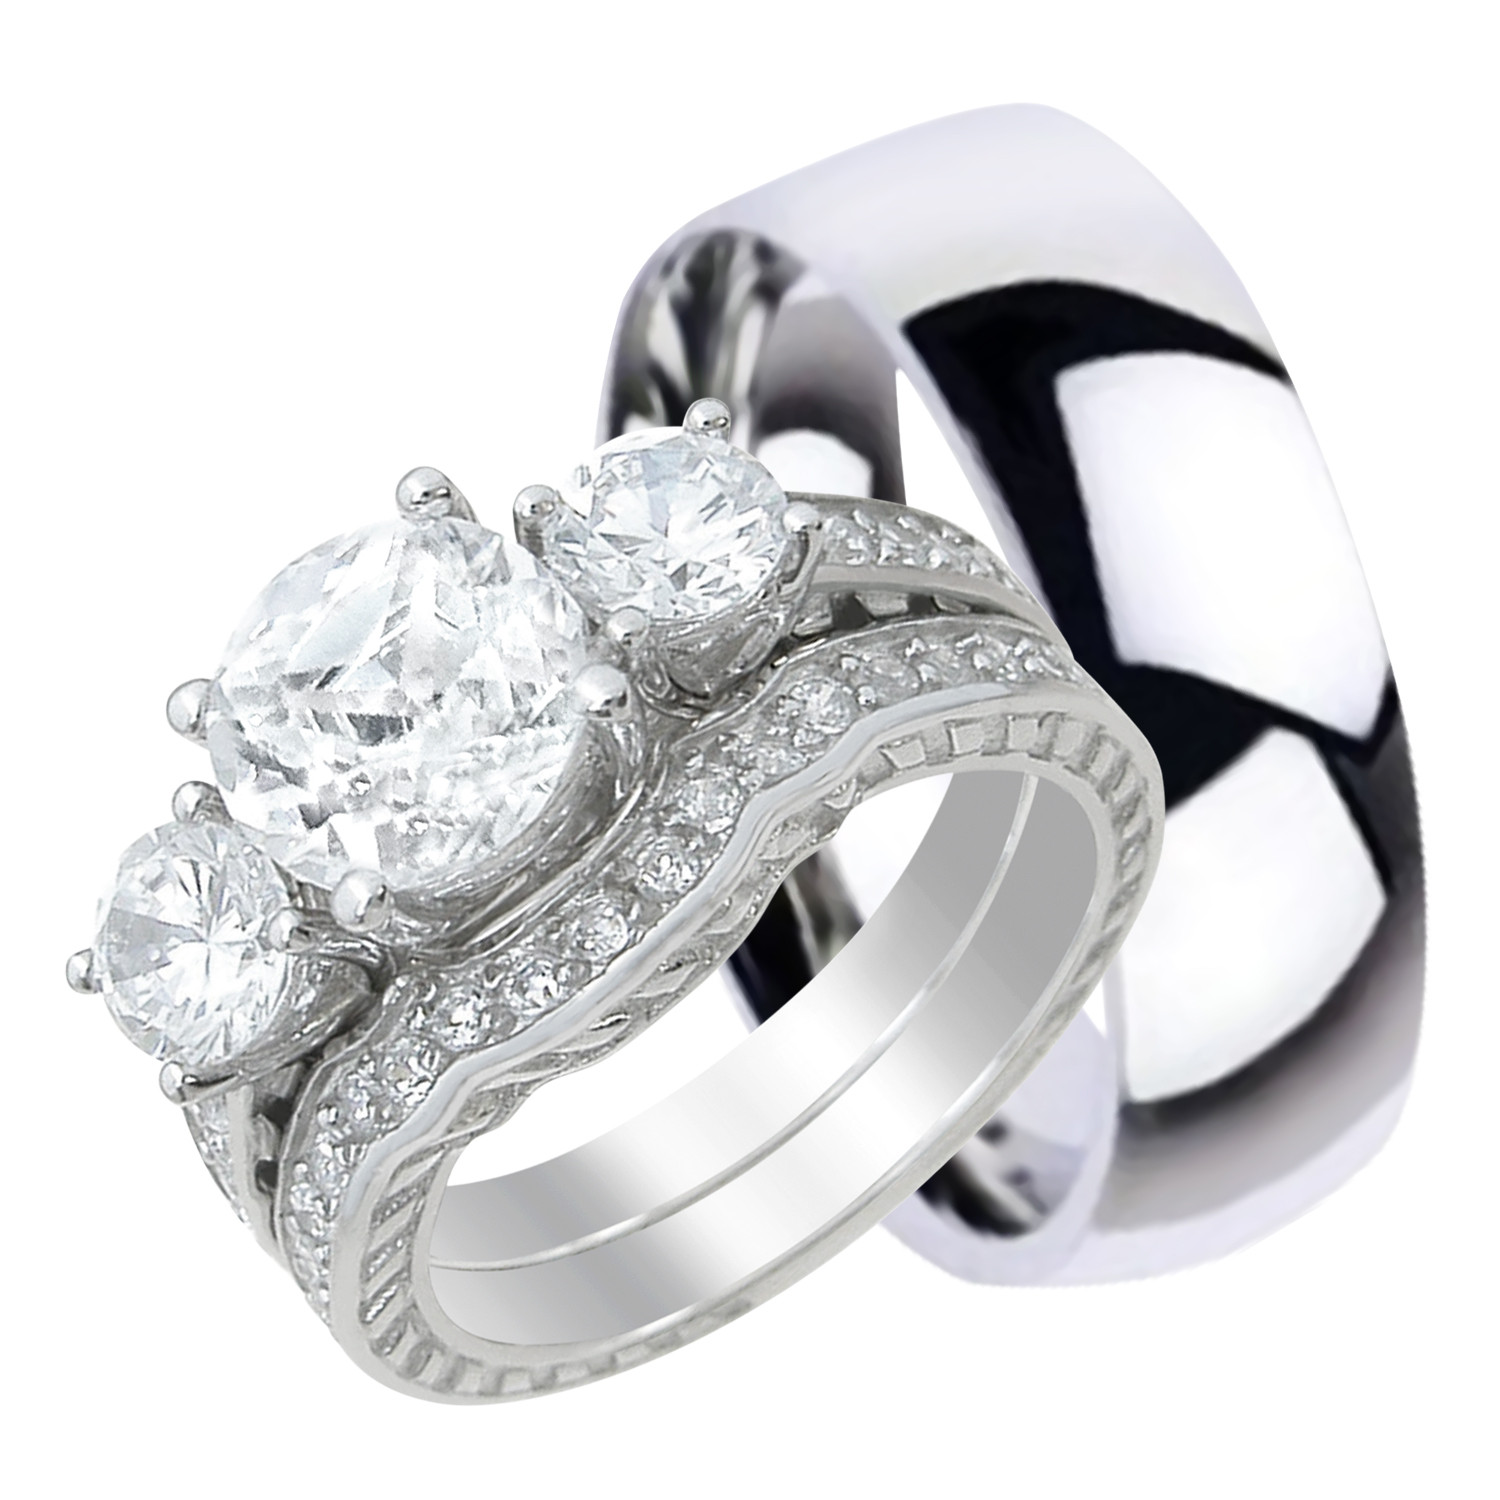 Wedding Ring Sets For Him And Her Walmart
 His and Hers Wedding Ring Sets Matching Silver Titanium